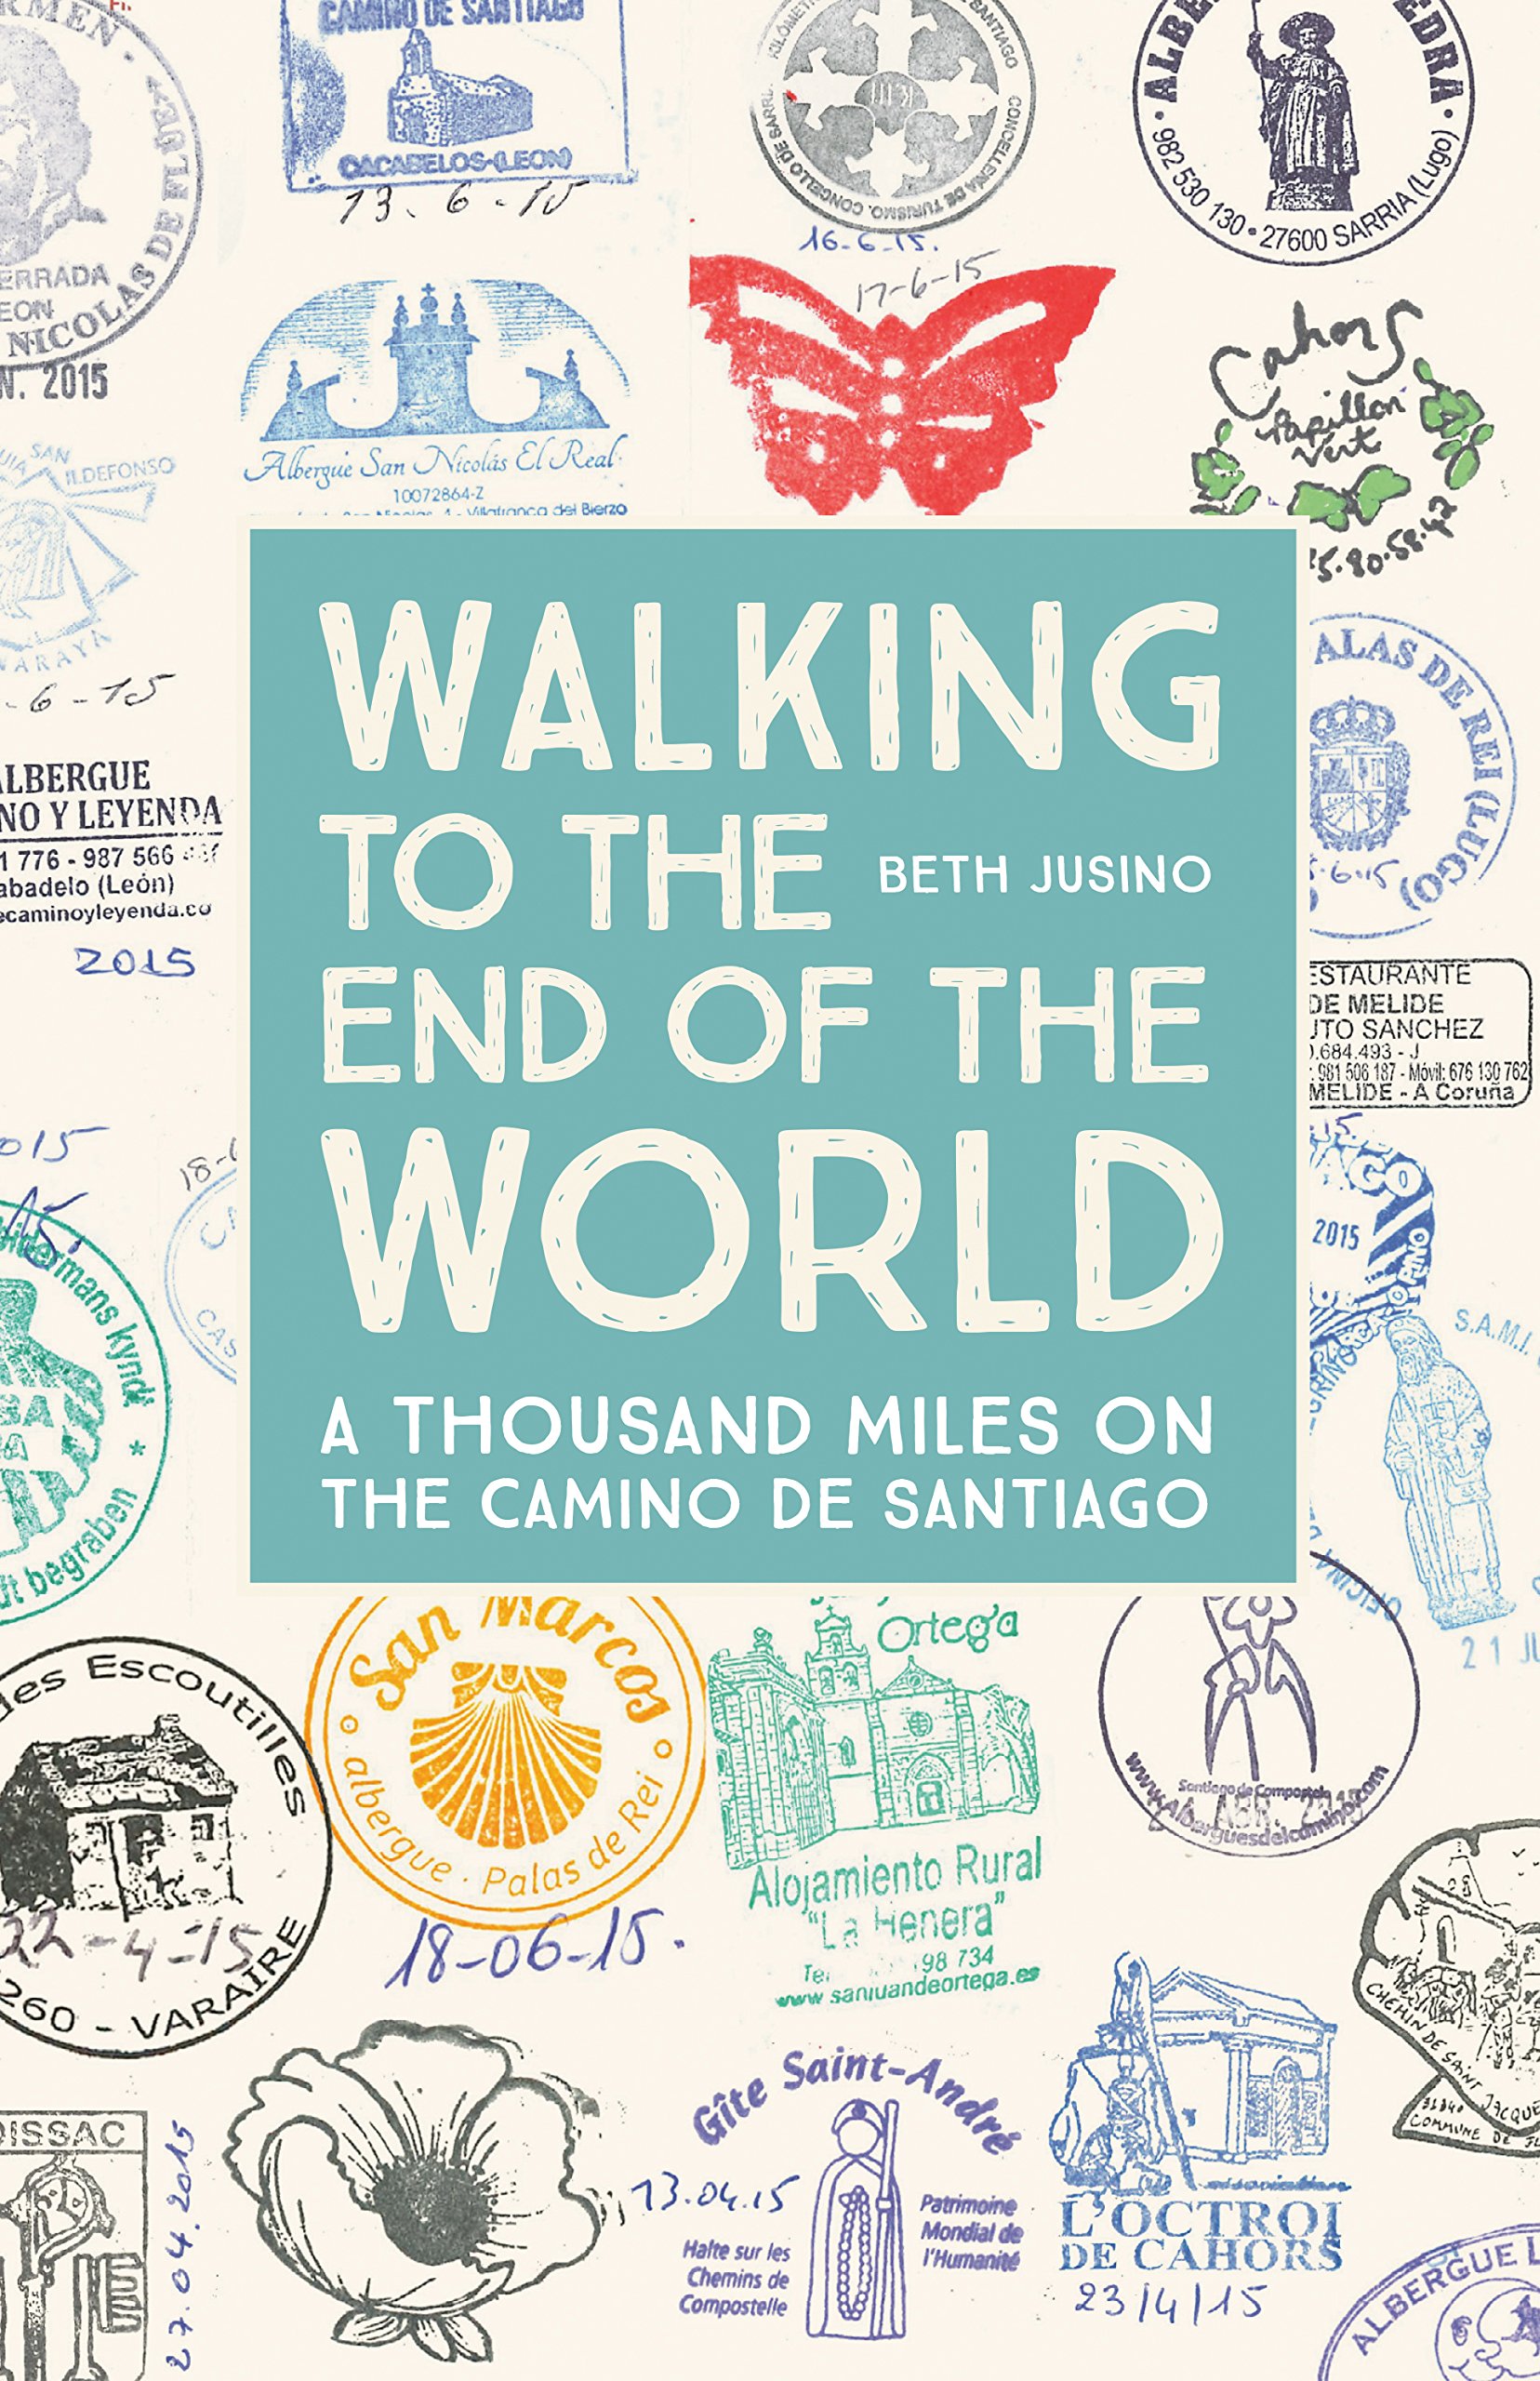 Walking to the End of the World: A Thousand Miles on the Camino De Santiago